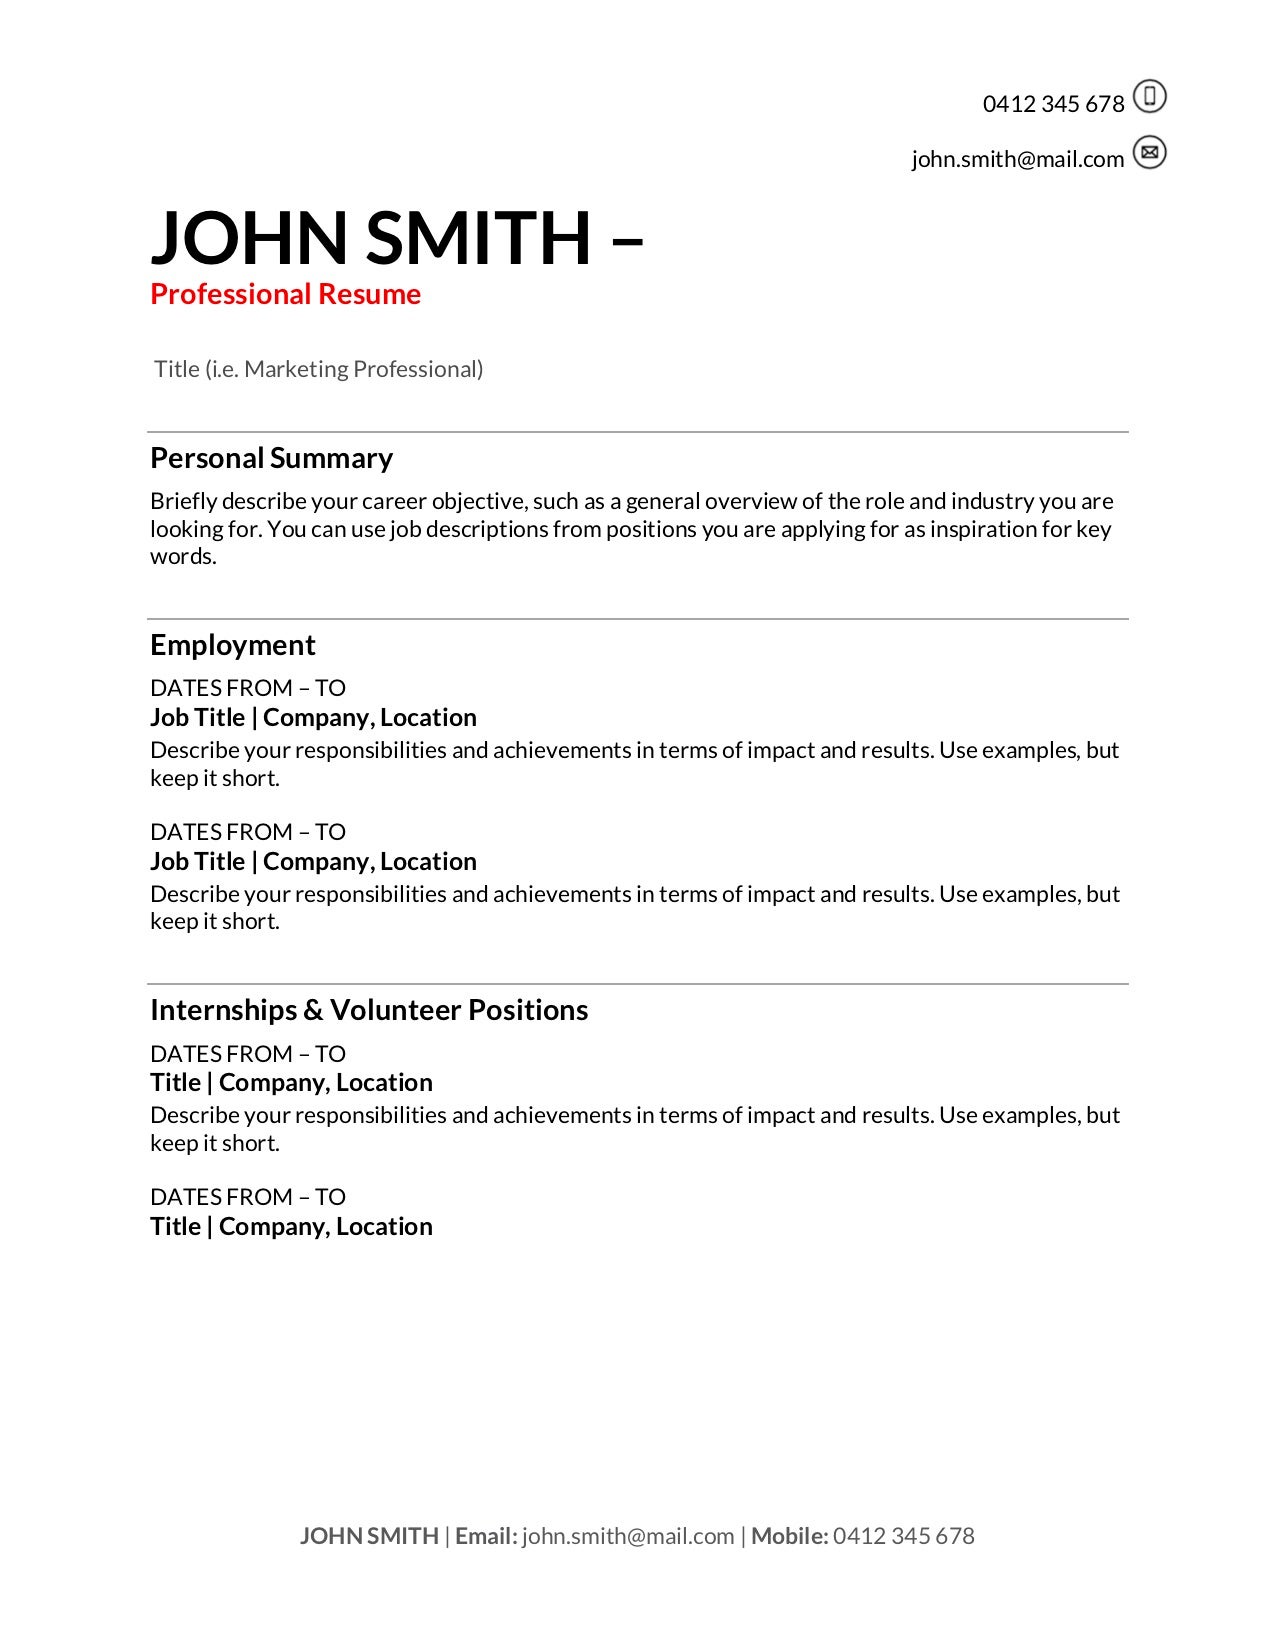 best resume templates free download college